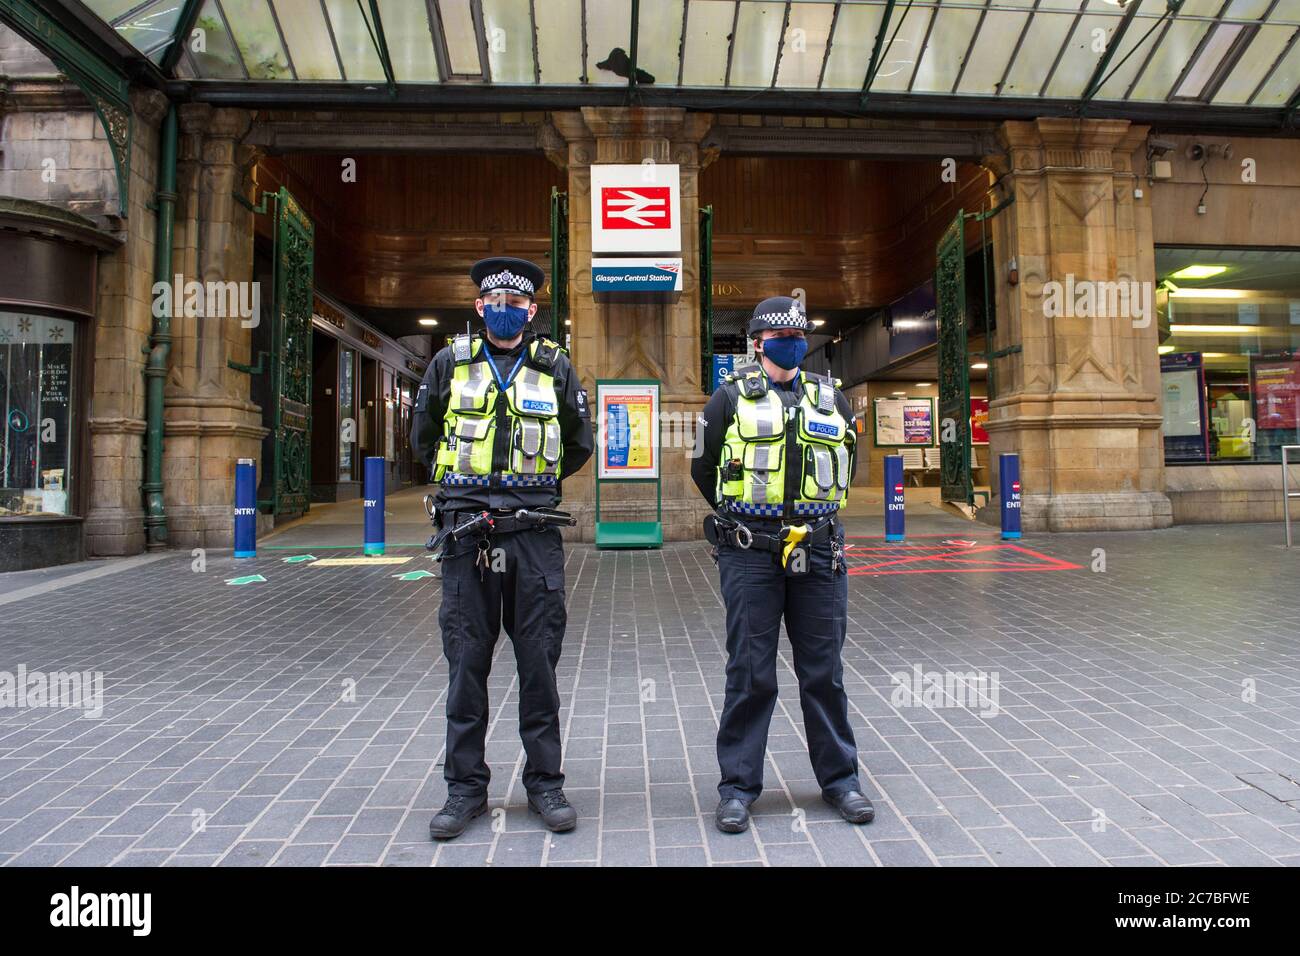 Glasgow, Scotland, UK. 16th July, 2020. Pictured: Police officers from Police Scotland seen wearing black face masks whilst on duty patrolling Glasgow Central Station. The Scottish Government made it mandatory that face coverings are worn when travelling on public transport in Scotland to help prevent the spread of coronavirus. Credit: Colin Fisher/Alamy Live News Stock Photo